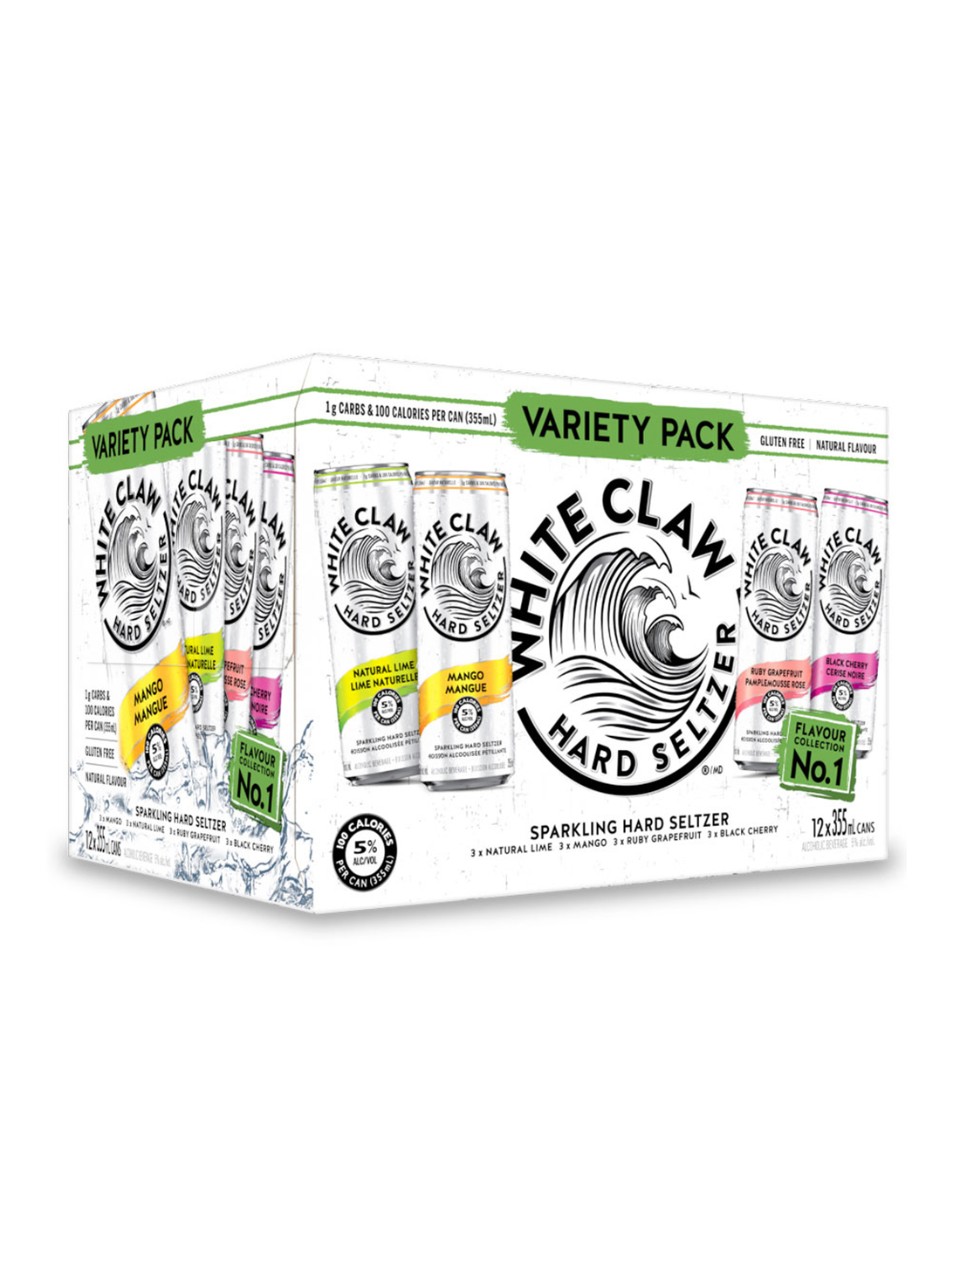 White Claw Variety Pack 1 LCBO